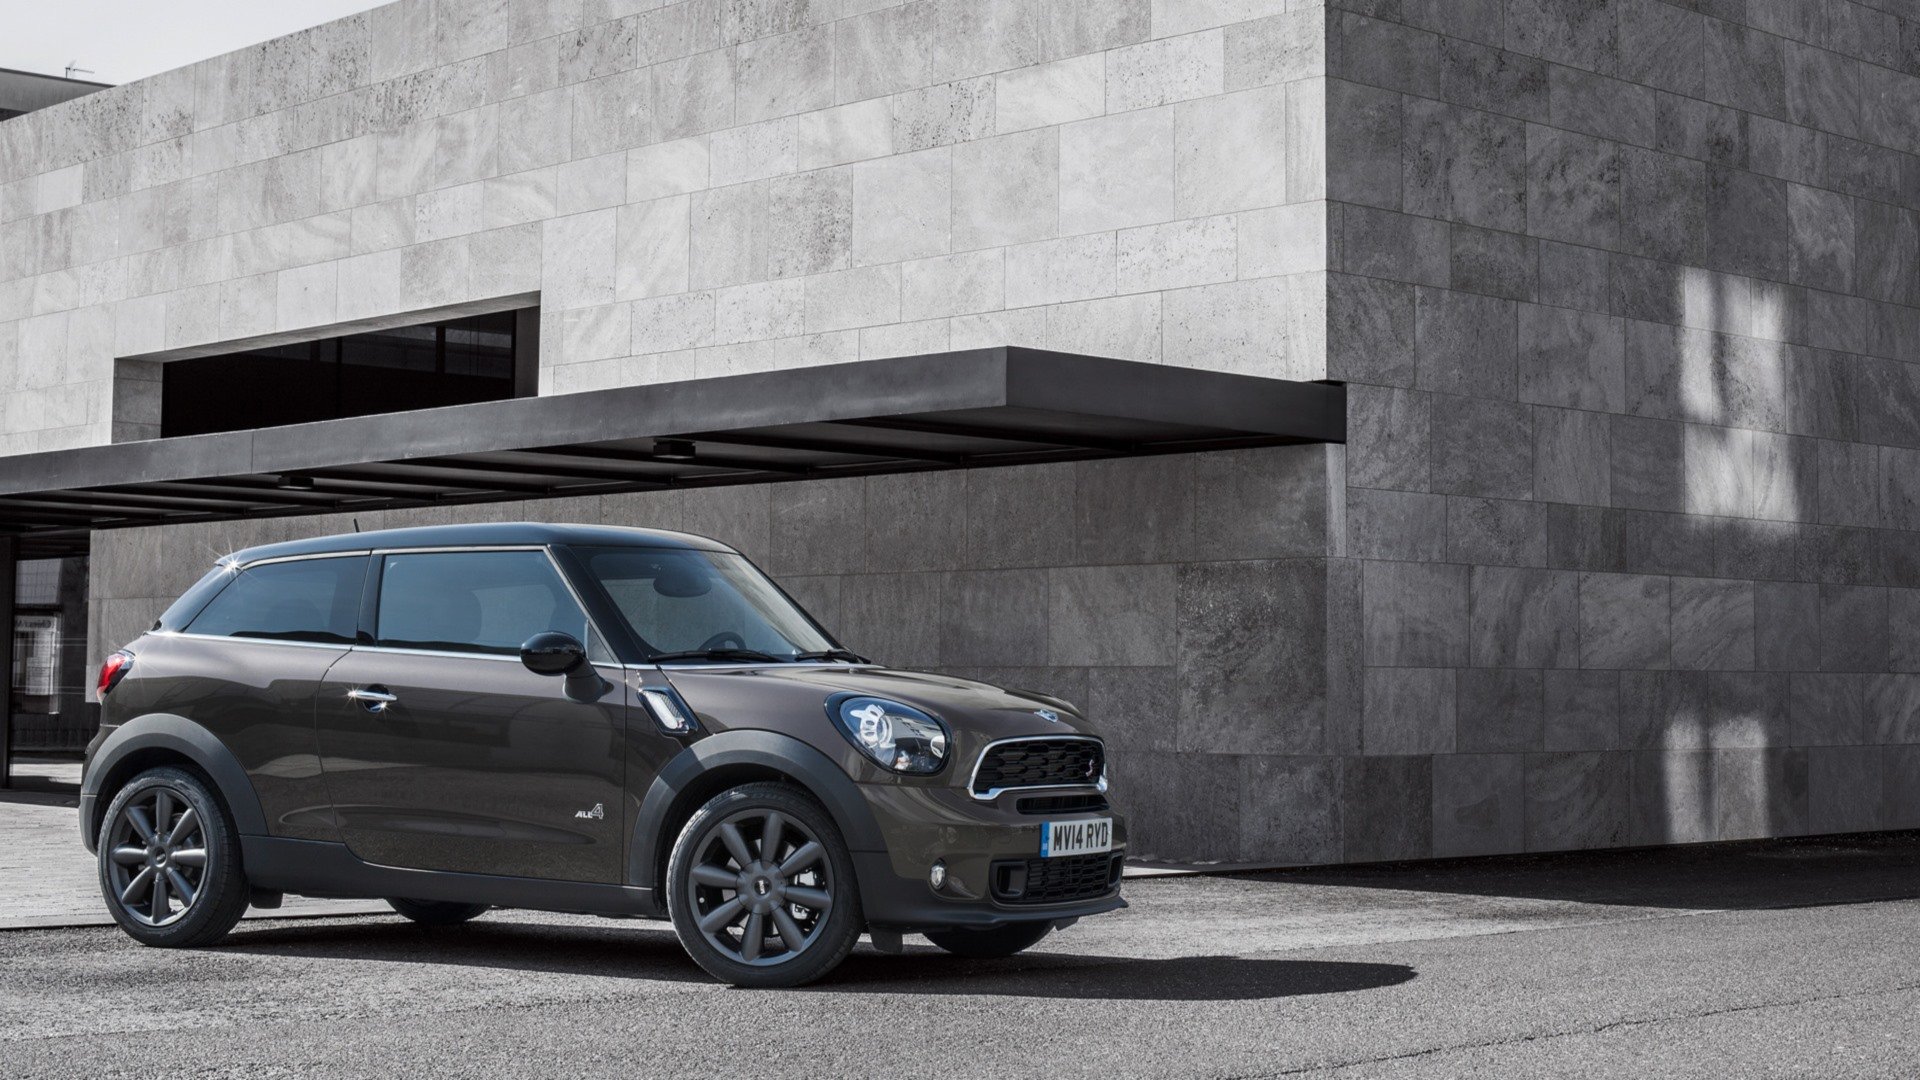 Best Mini Paceman Adventure 2014 wallpaper ID:378986 for High Resolution hd 1920x1080 PC